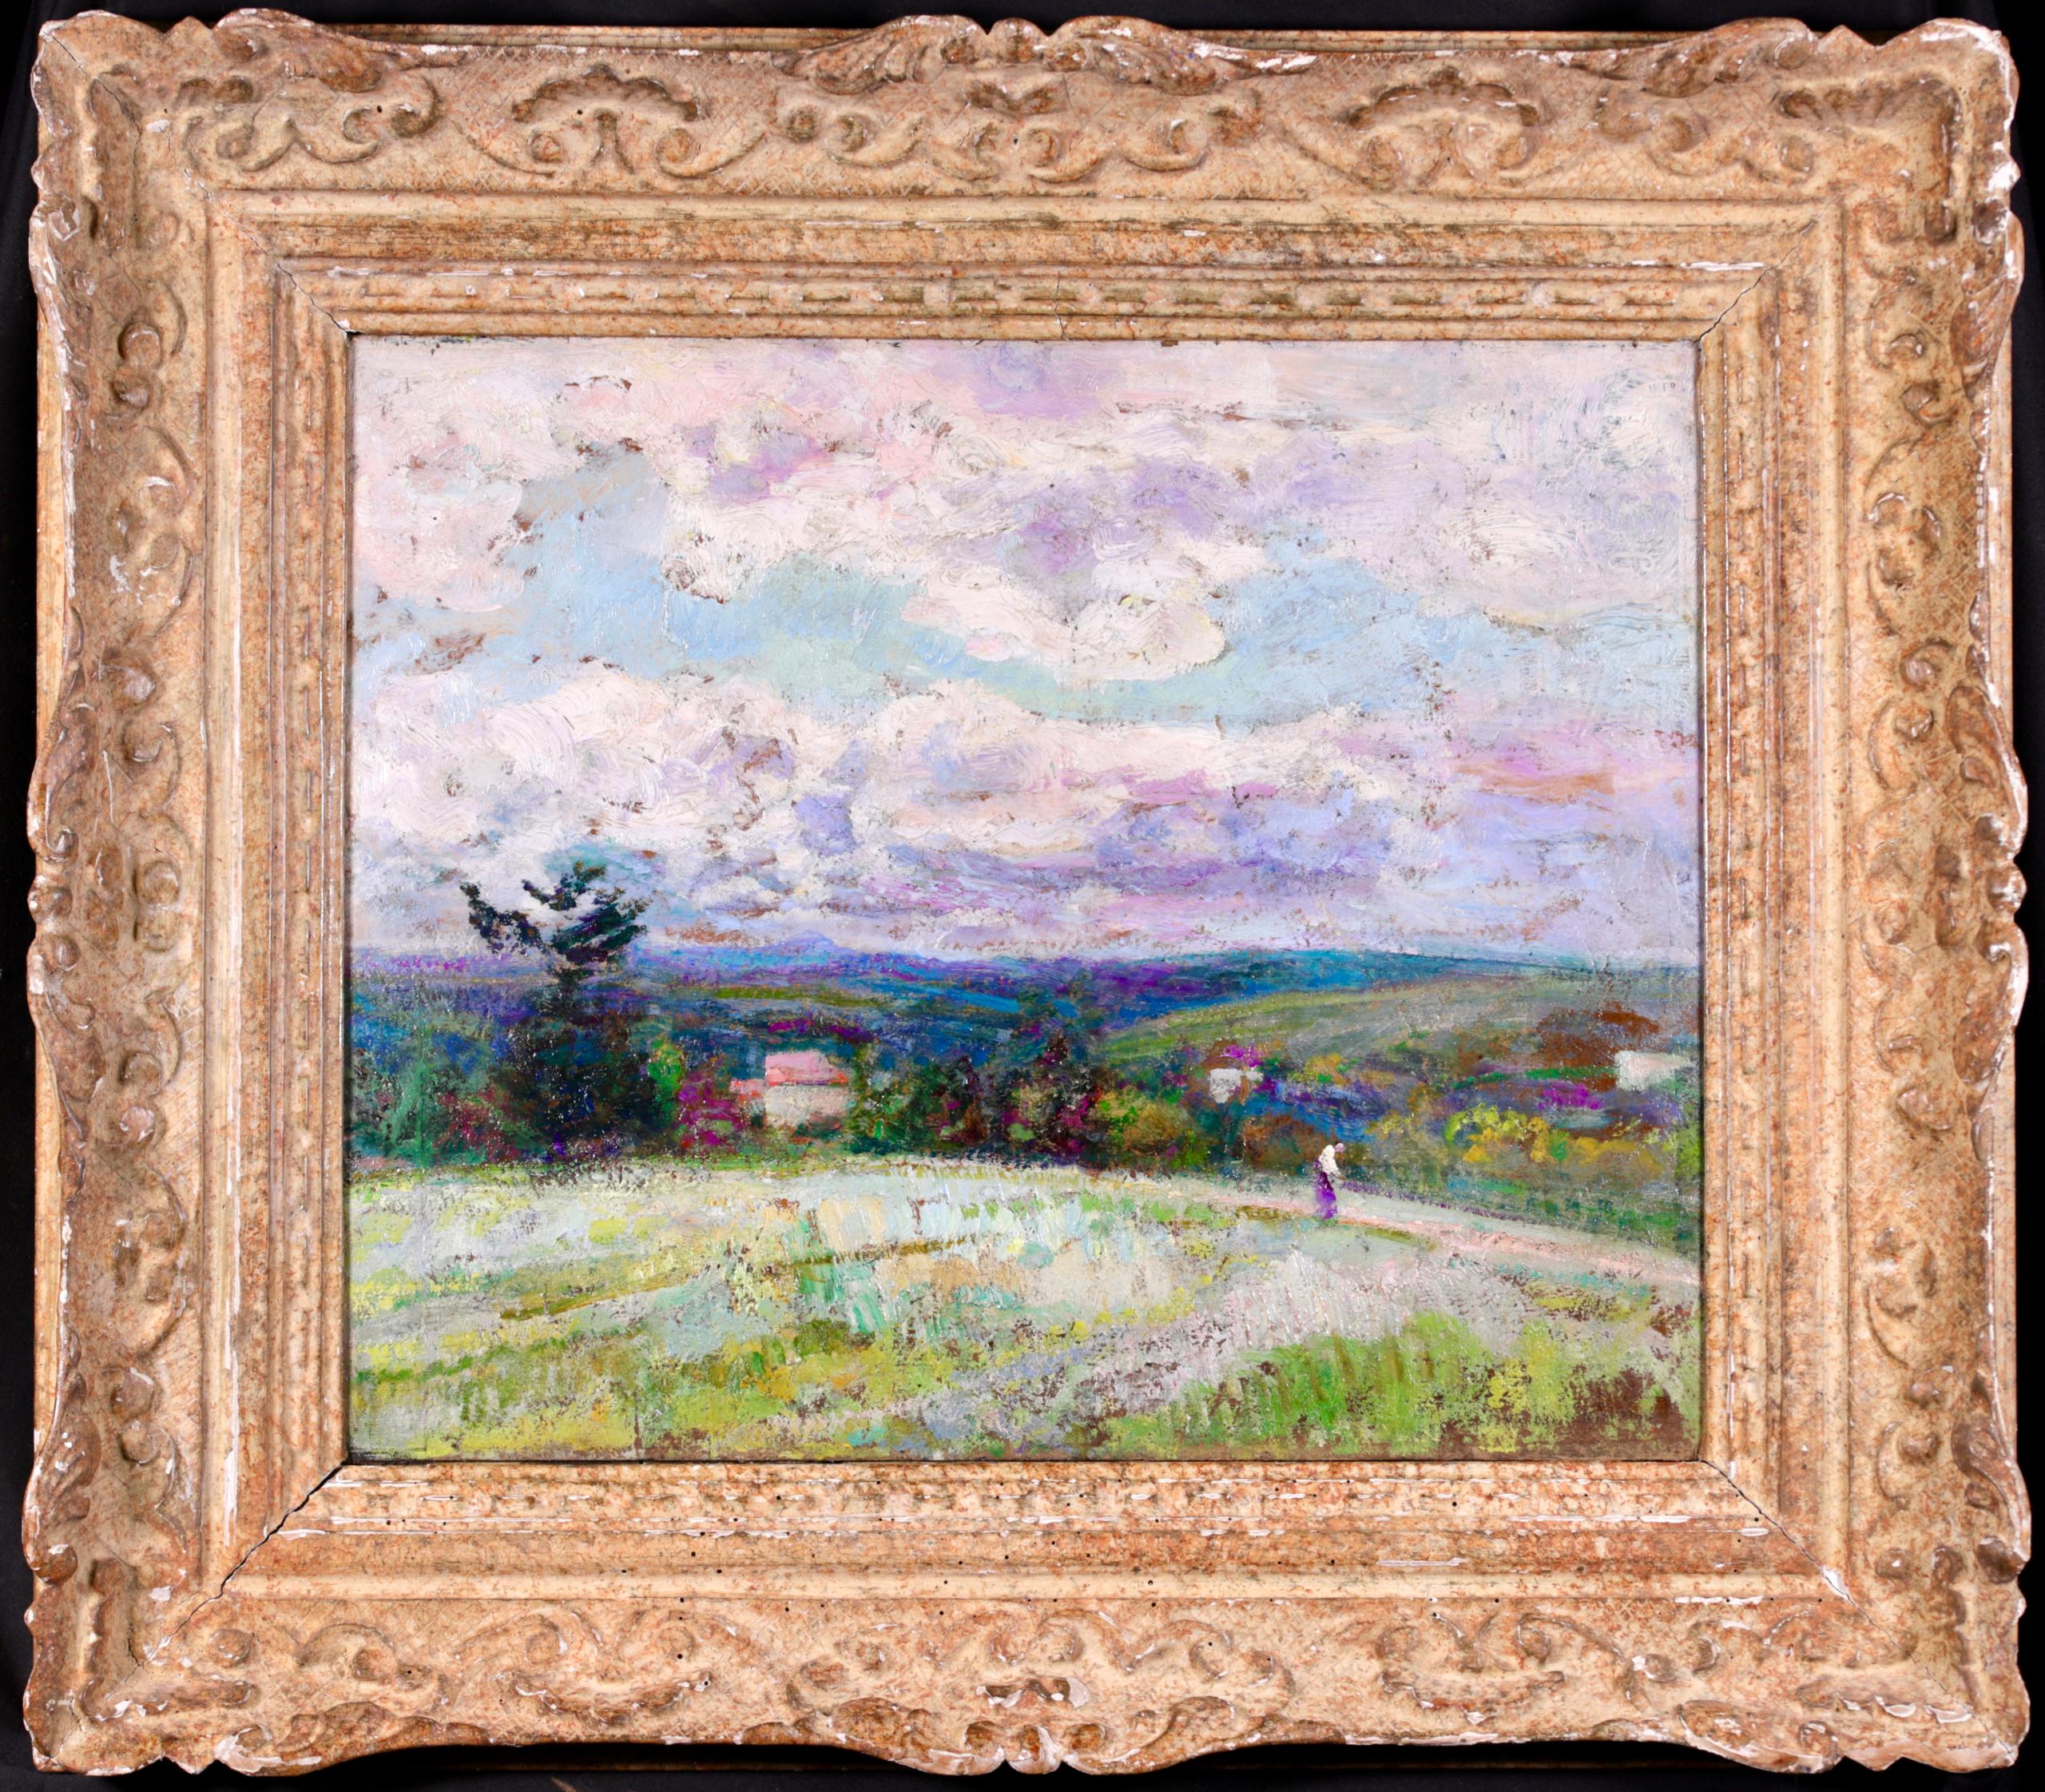 Beautiful signed oil on board landscape circa 1920 by sought after post impressionist painter Victor Charreton. The piece depicts a figure walking through green rolling fields with houses dotted in the distance and clouds painted with hues of blue,